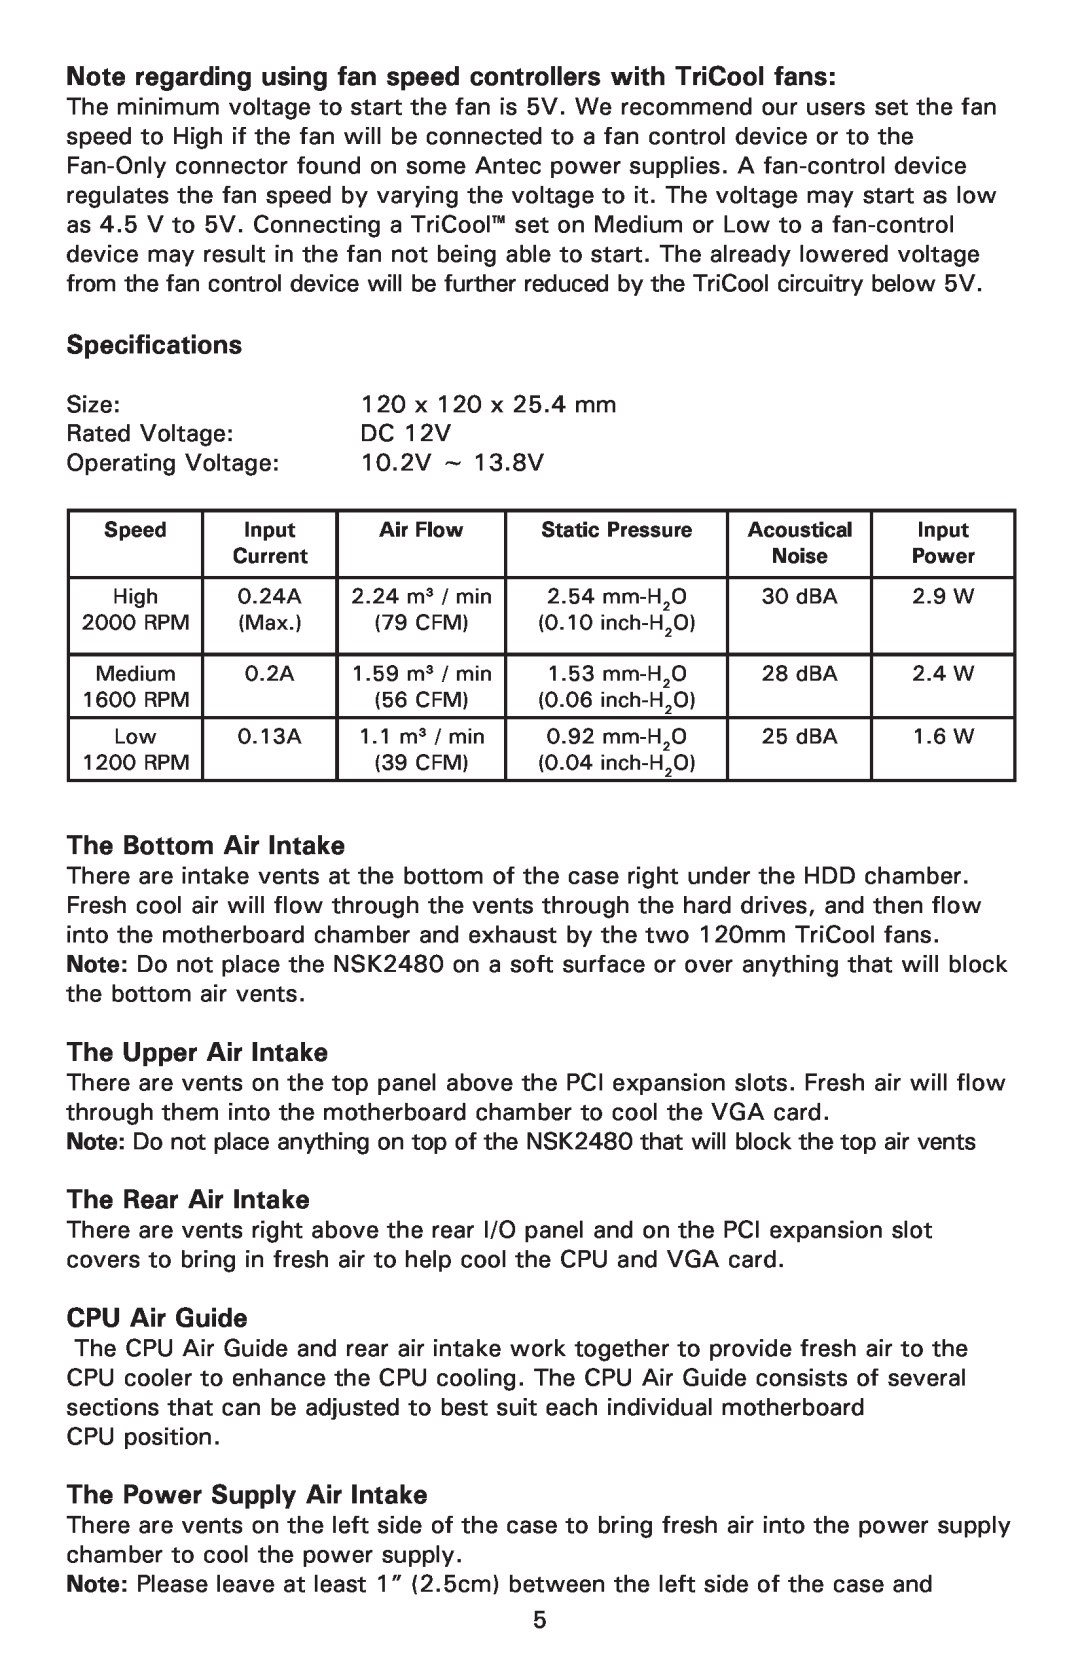 Antec New Solution Series Note regarding using fan speed controllers with TriCool fans, Specifications, CPU Air Guide 